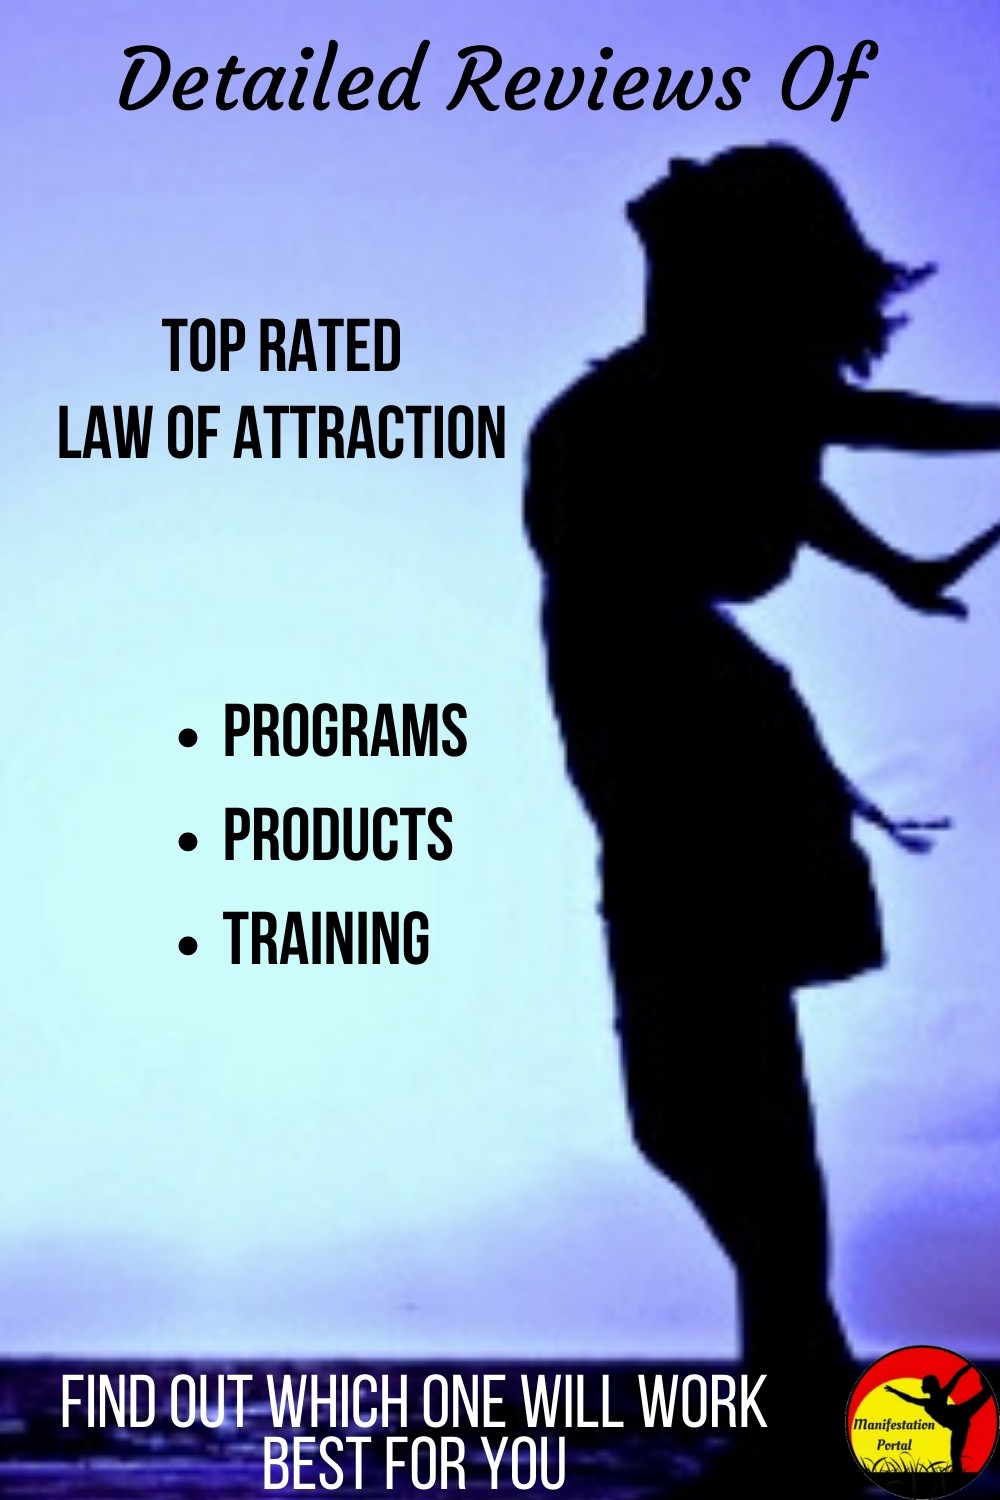 The Law Of Atraction Programs, Products And Training